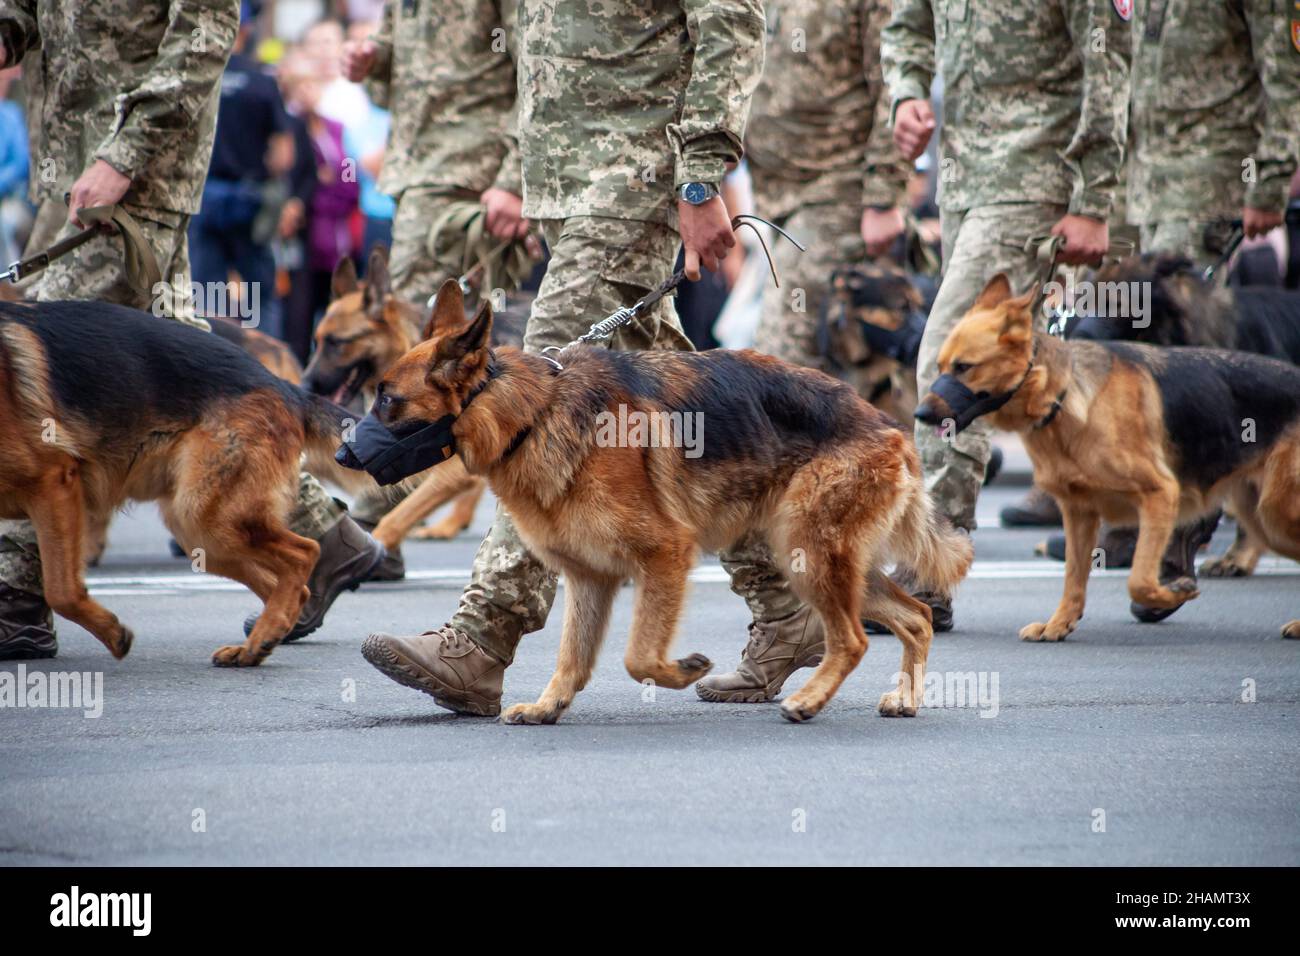 Dogs in the service of the state. Shepherd dog border guard on the street. A guard dog in a muzzle. Purebred dog on parade with the military Stock Photo